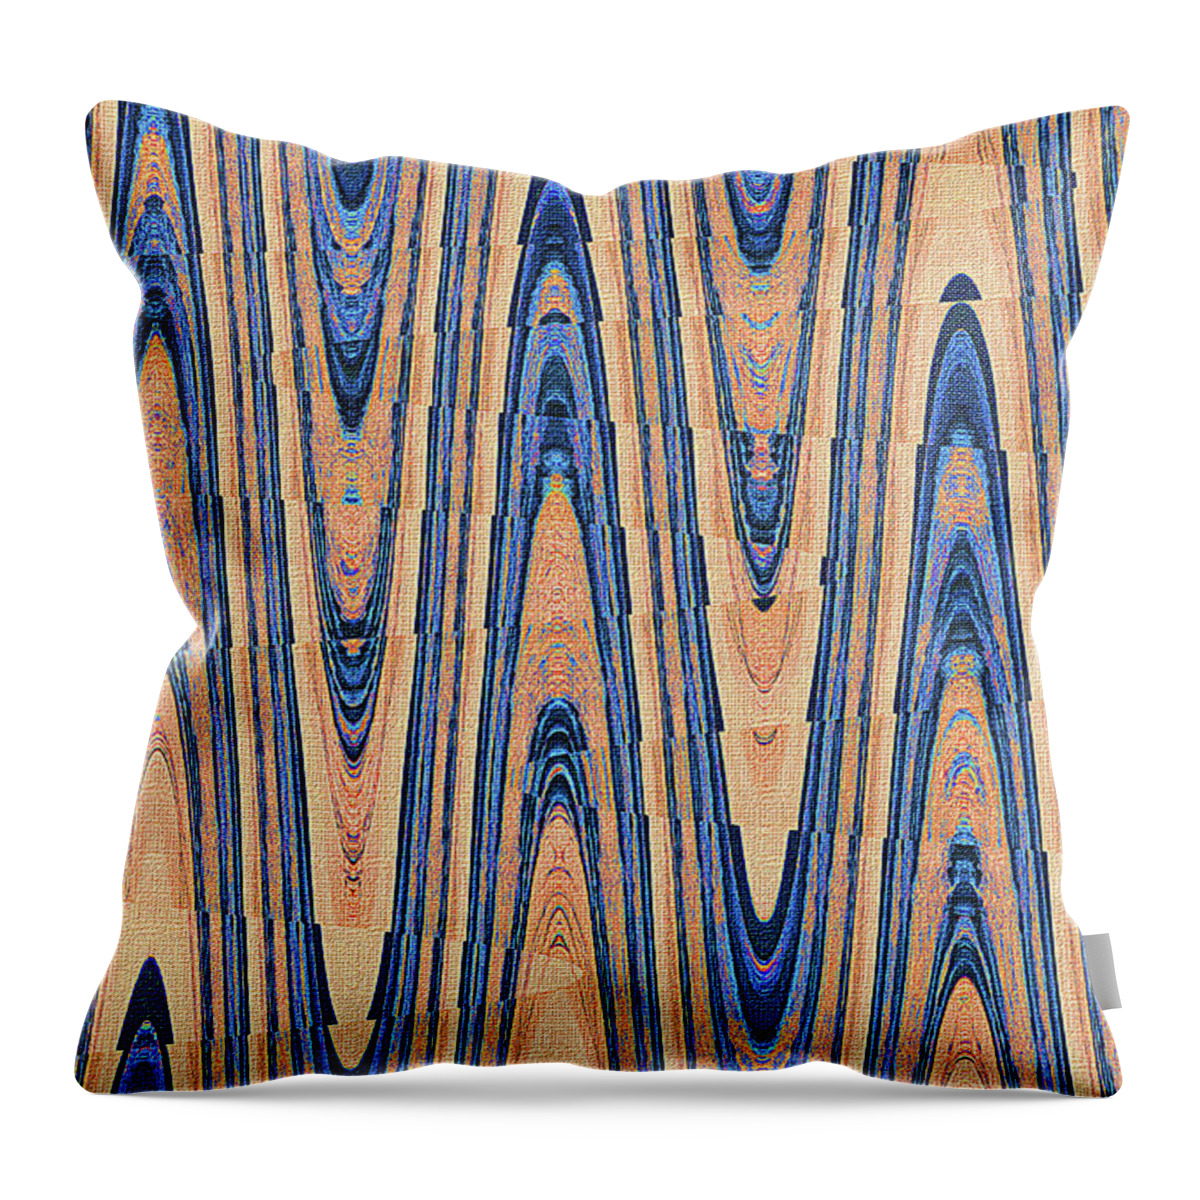 Pacific Ocean Waves Abstract Throw Pillow featuring the digital art Pacific Ocean Waves Abstract by Tom Janca